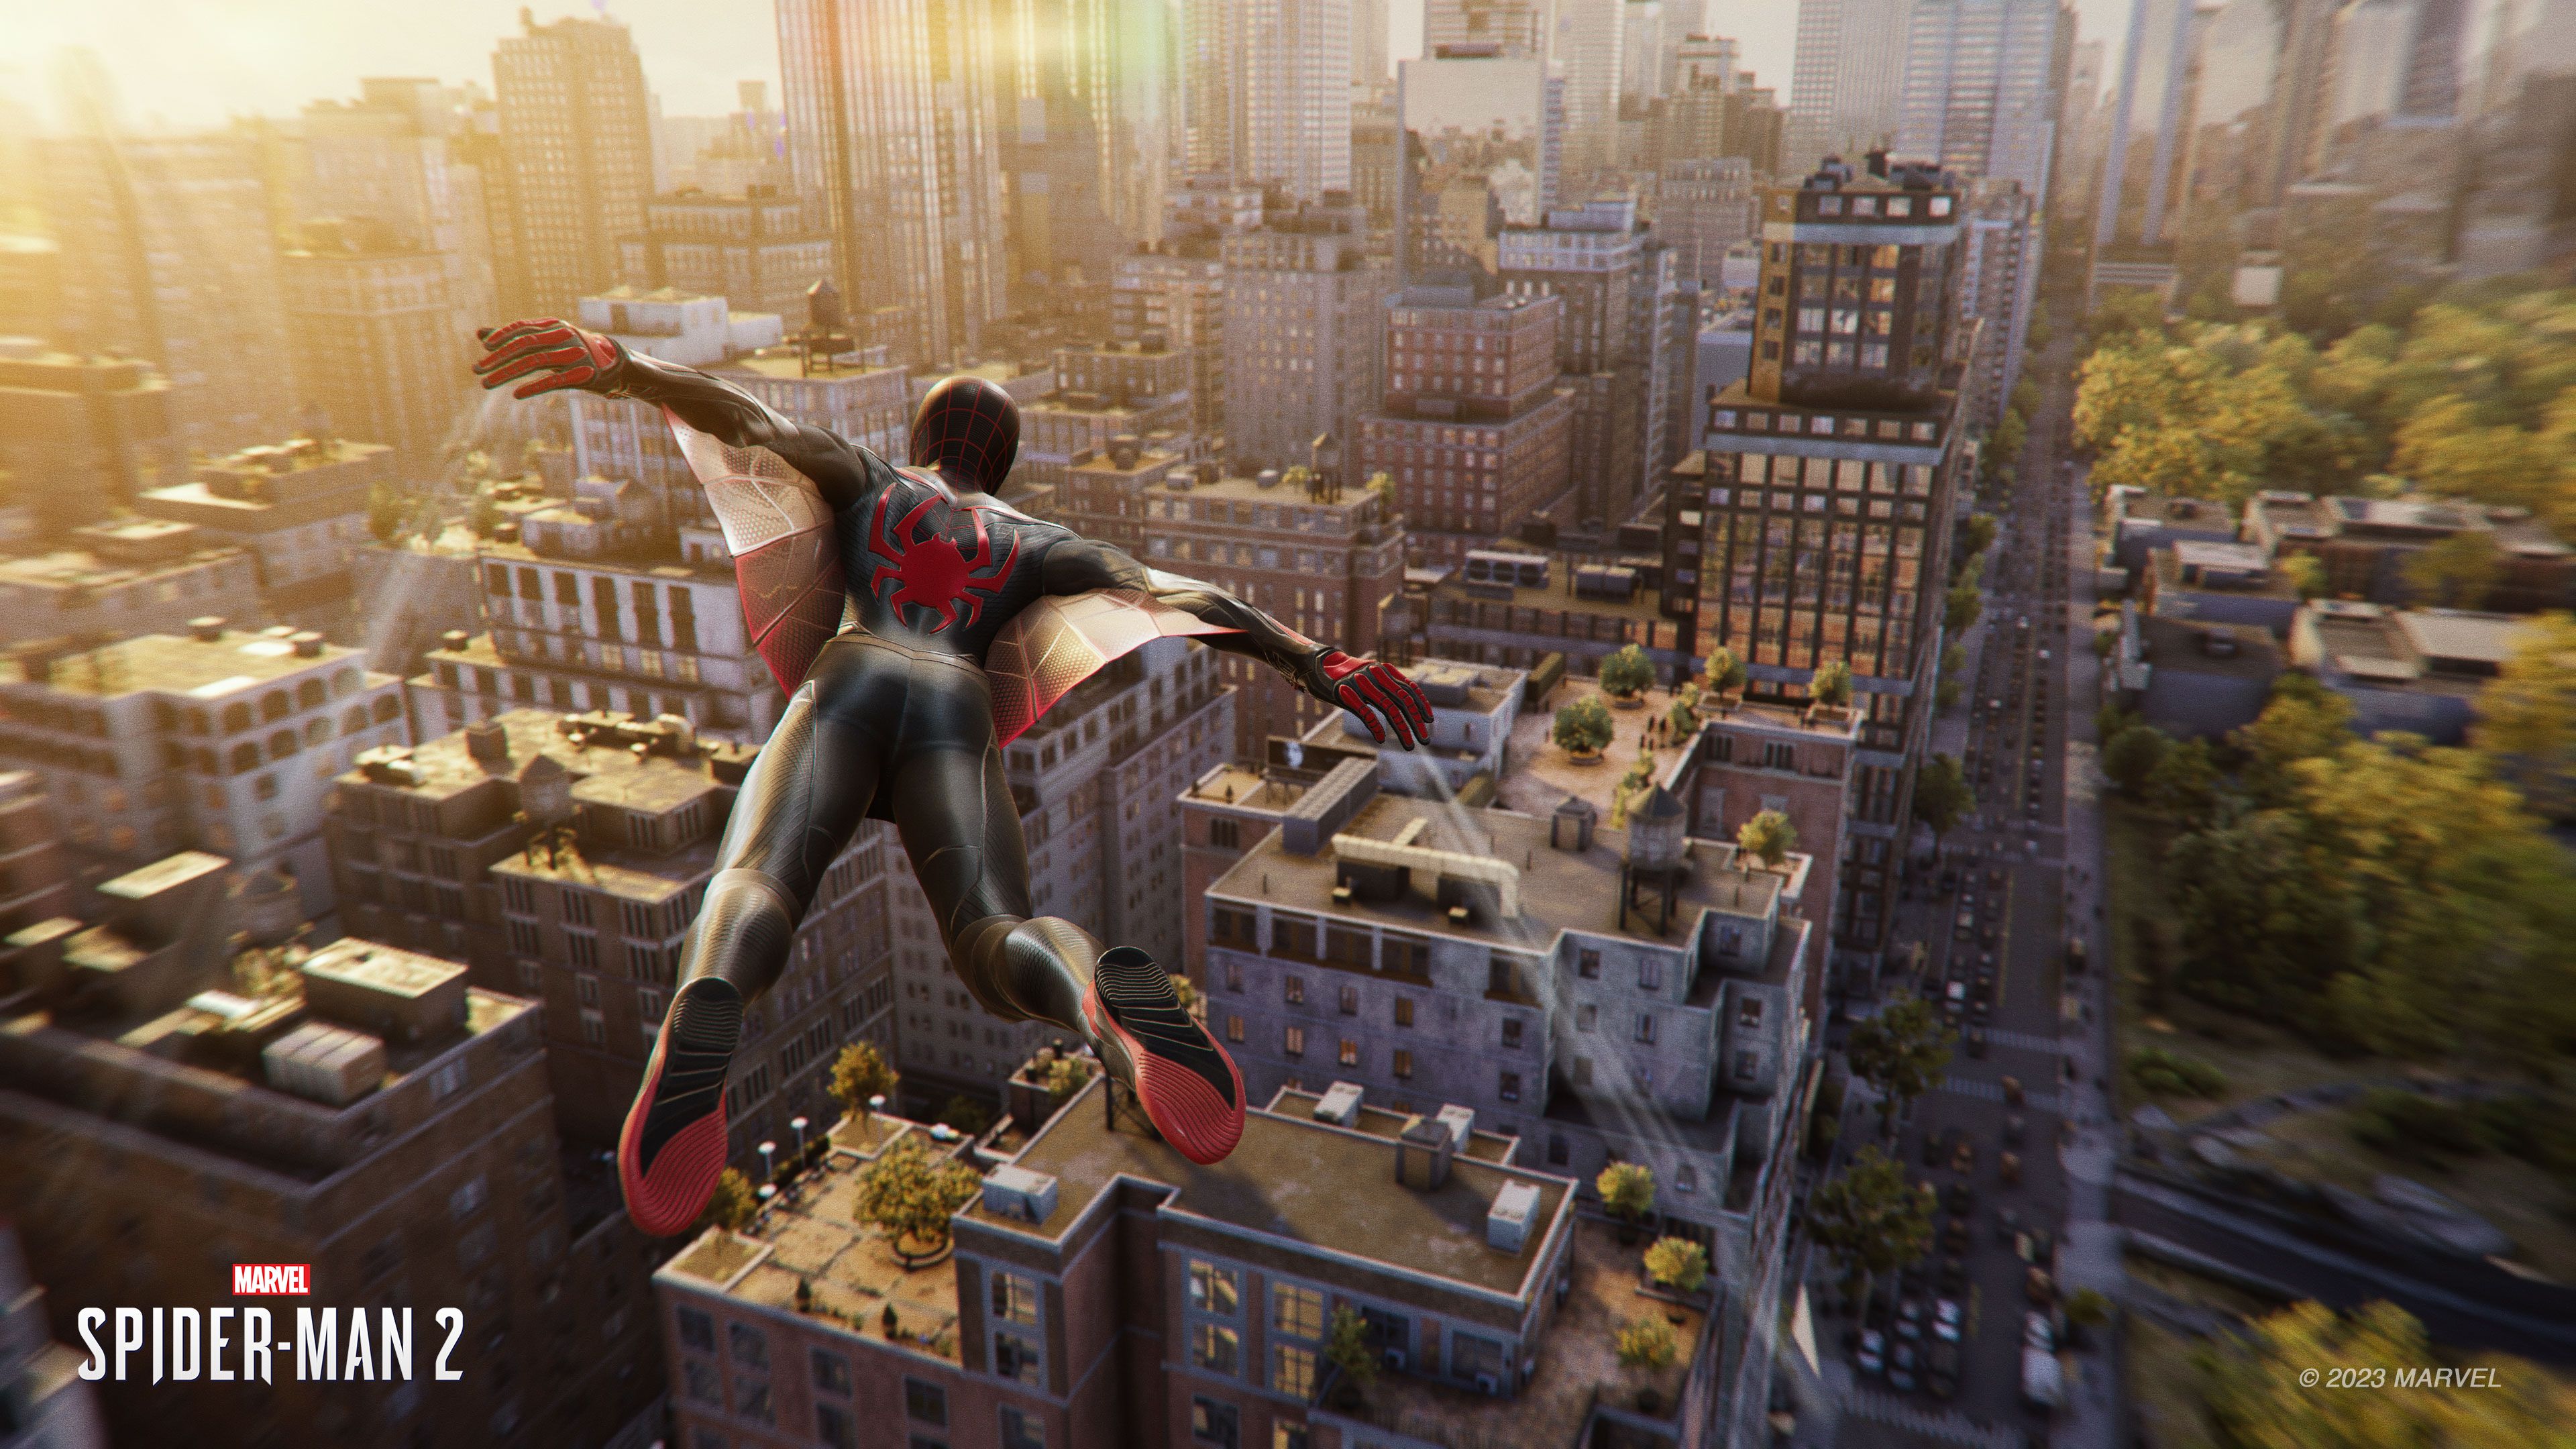 Marvel's Spider-Man 2 review: An ultimate superhero sequel